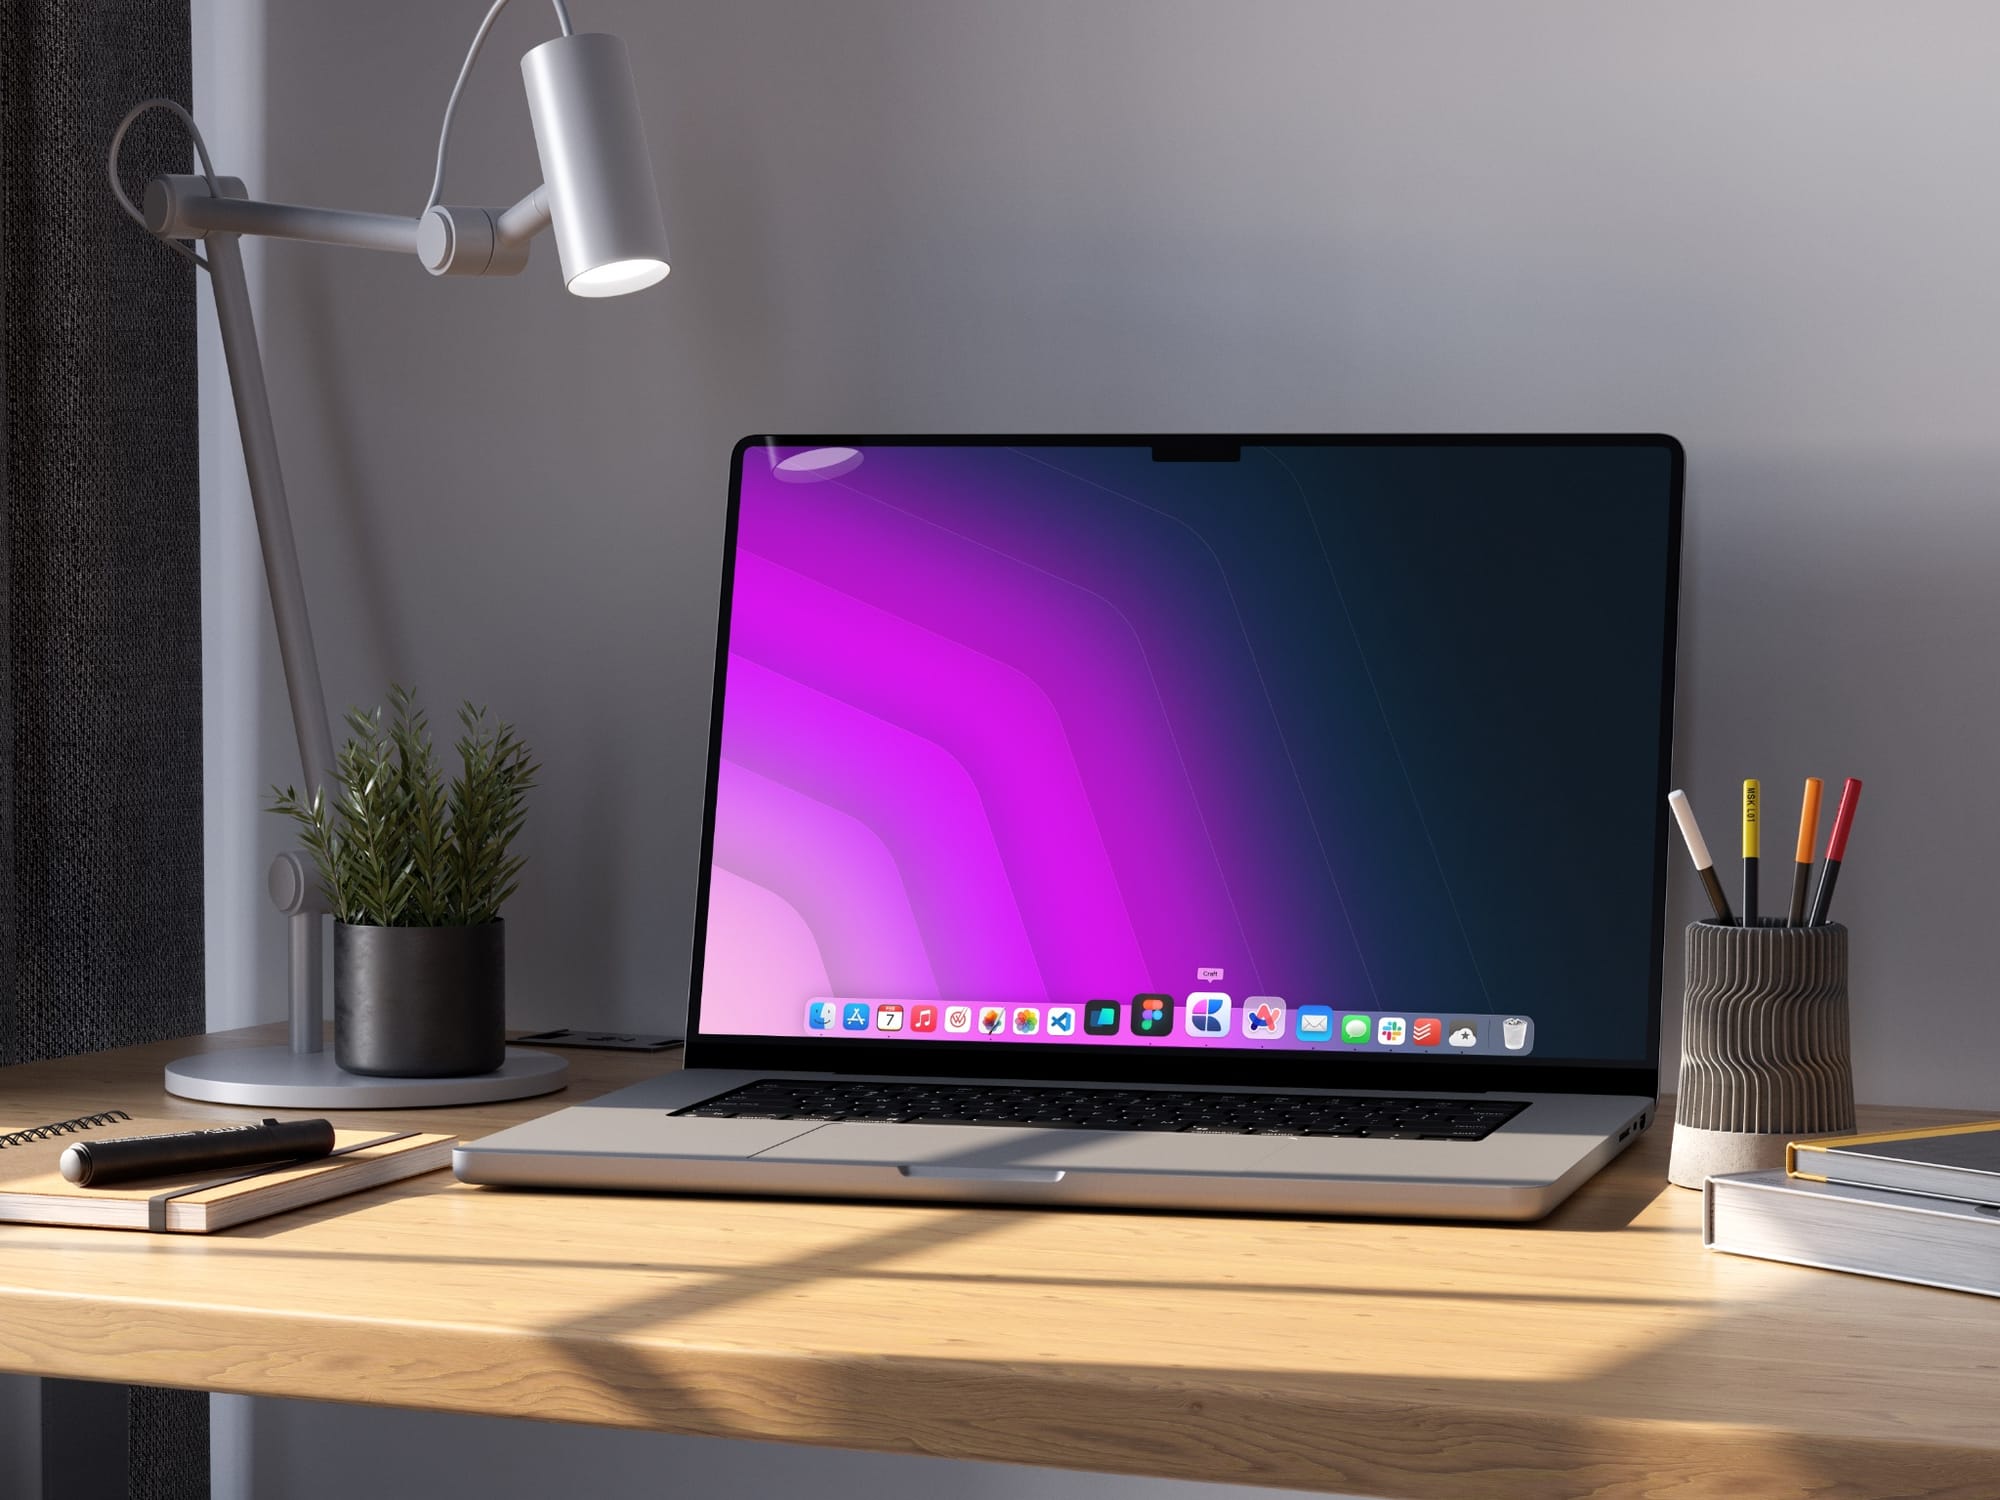 MacBook Pro on a wooden desk showcasing the macOS dock with several app icons